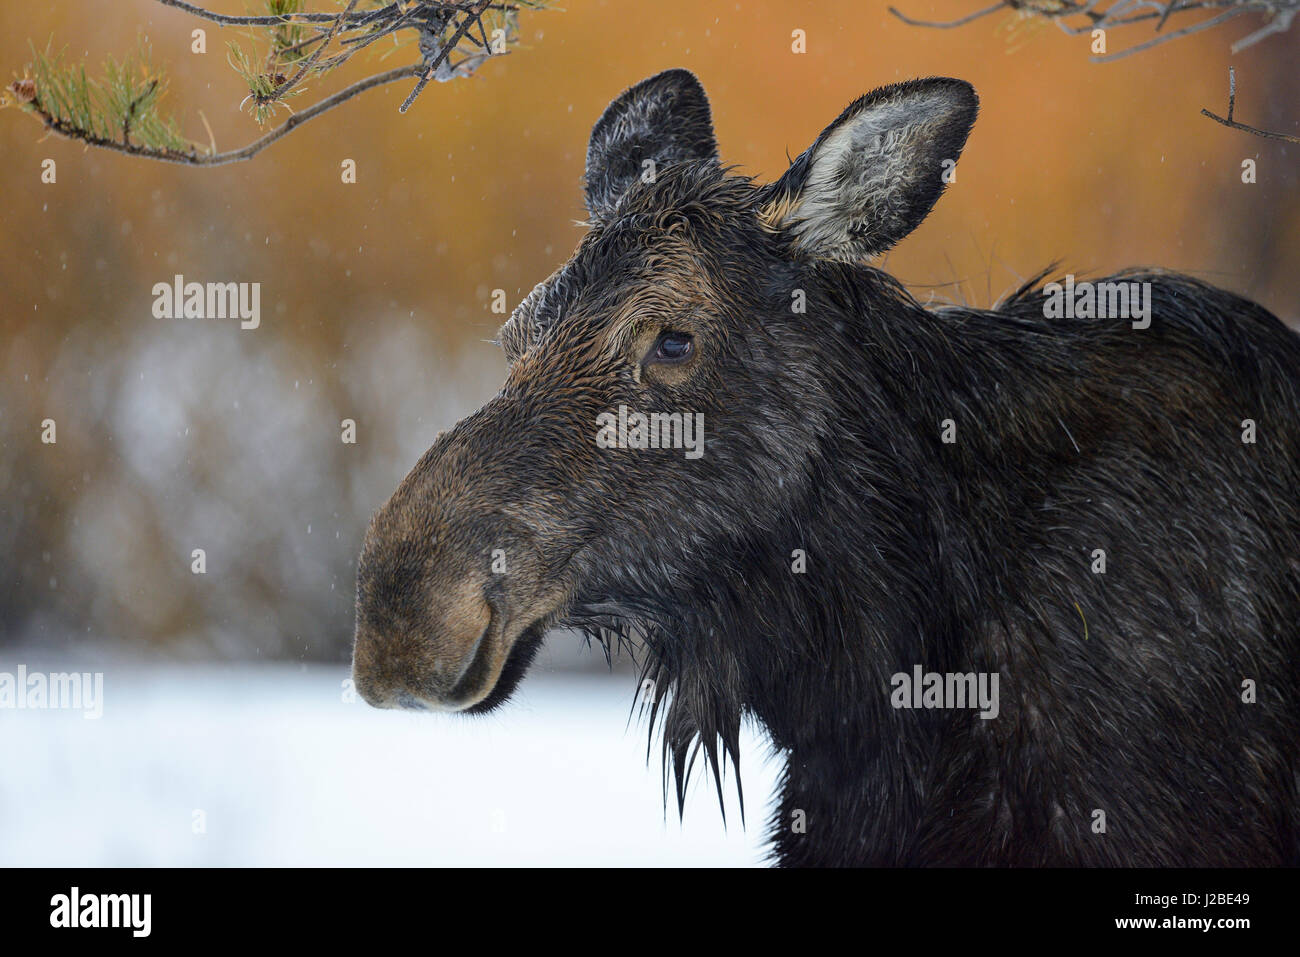 Moose / Elch ( Alces alces ) in winter, headshot of an adult female, detailled close-up on a rainy day, Yellowstone Area, Grand Teton, Wyoming, USA. Stock Photo